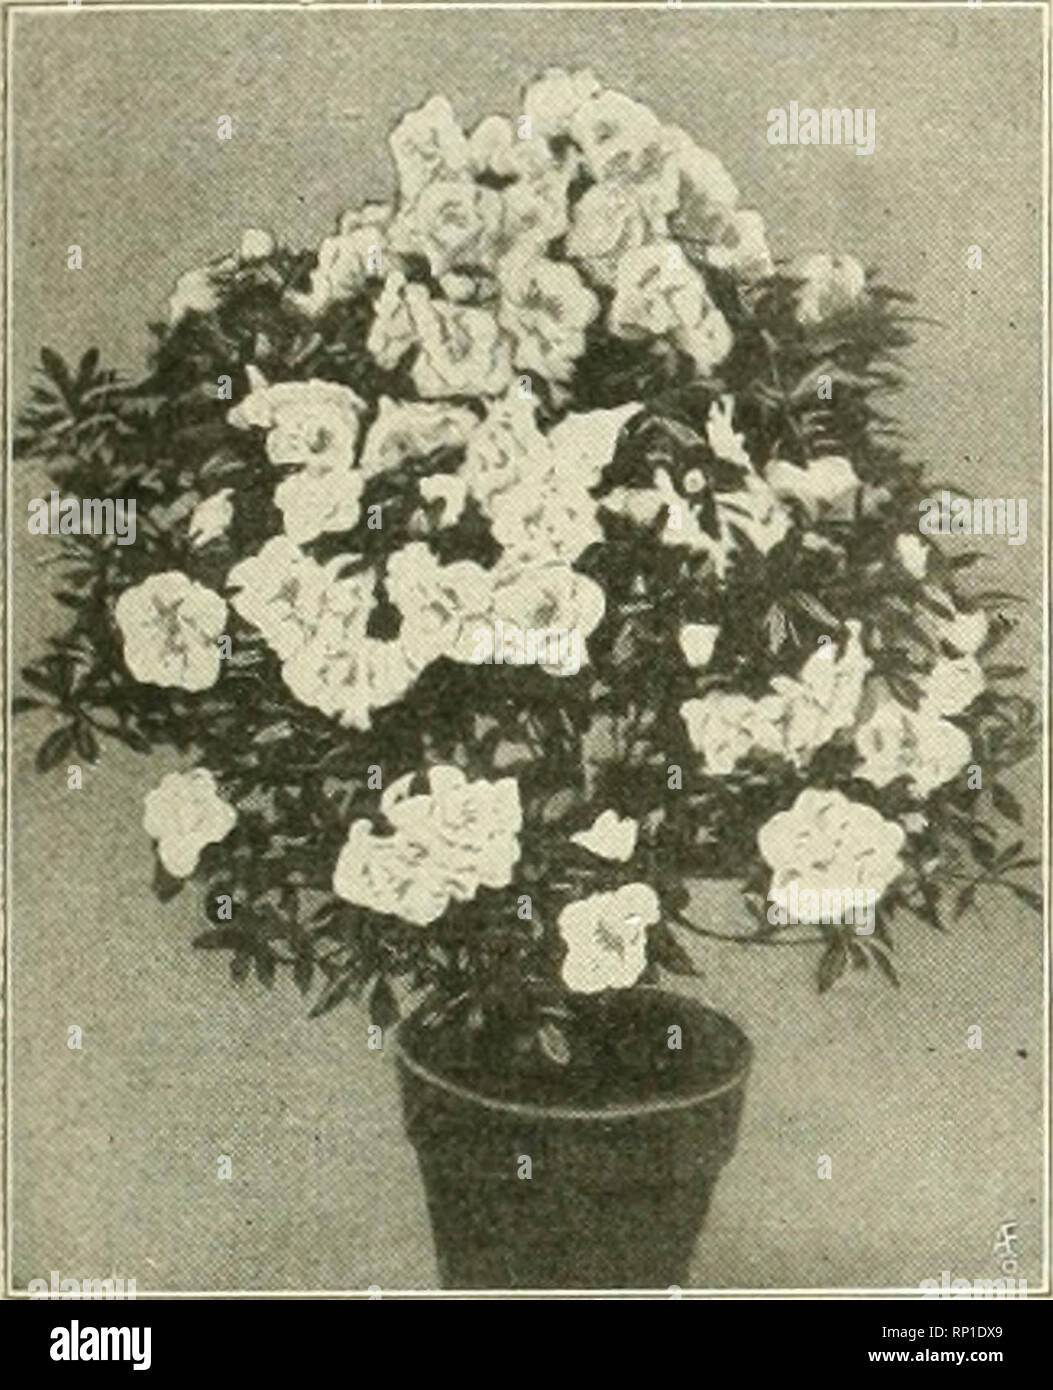 . The American florist : a weekly journal for the trade. Floriculture; Florists. igii. The American Florist. 1189 Azaleas for Christmas at Godfrey Aschmann's greenhouses to beat the band, selected for us in Belgium purposely for our Christmas forcing. I tell you they are crackerjacks. We have Mme. Petrick, finest pink, from 75c up. This is the earliest and best of all the pinks. Stock up with Godfrey Aschtnaun's Plants, well known from ocean to ocean in quality and prices. It won't pay to let others get ahead of you. Don't look at what is behind, bat go right straight forward. Make a break for Stock Photo